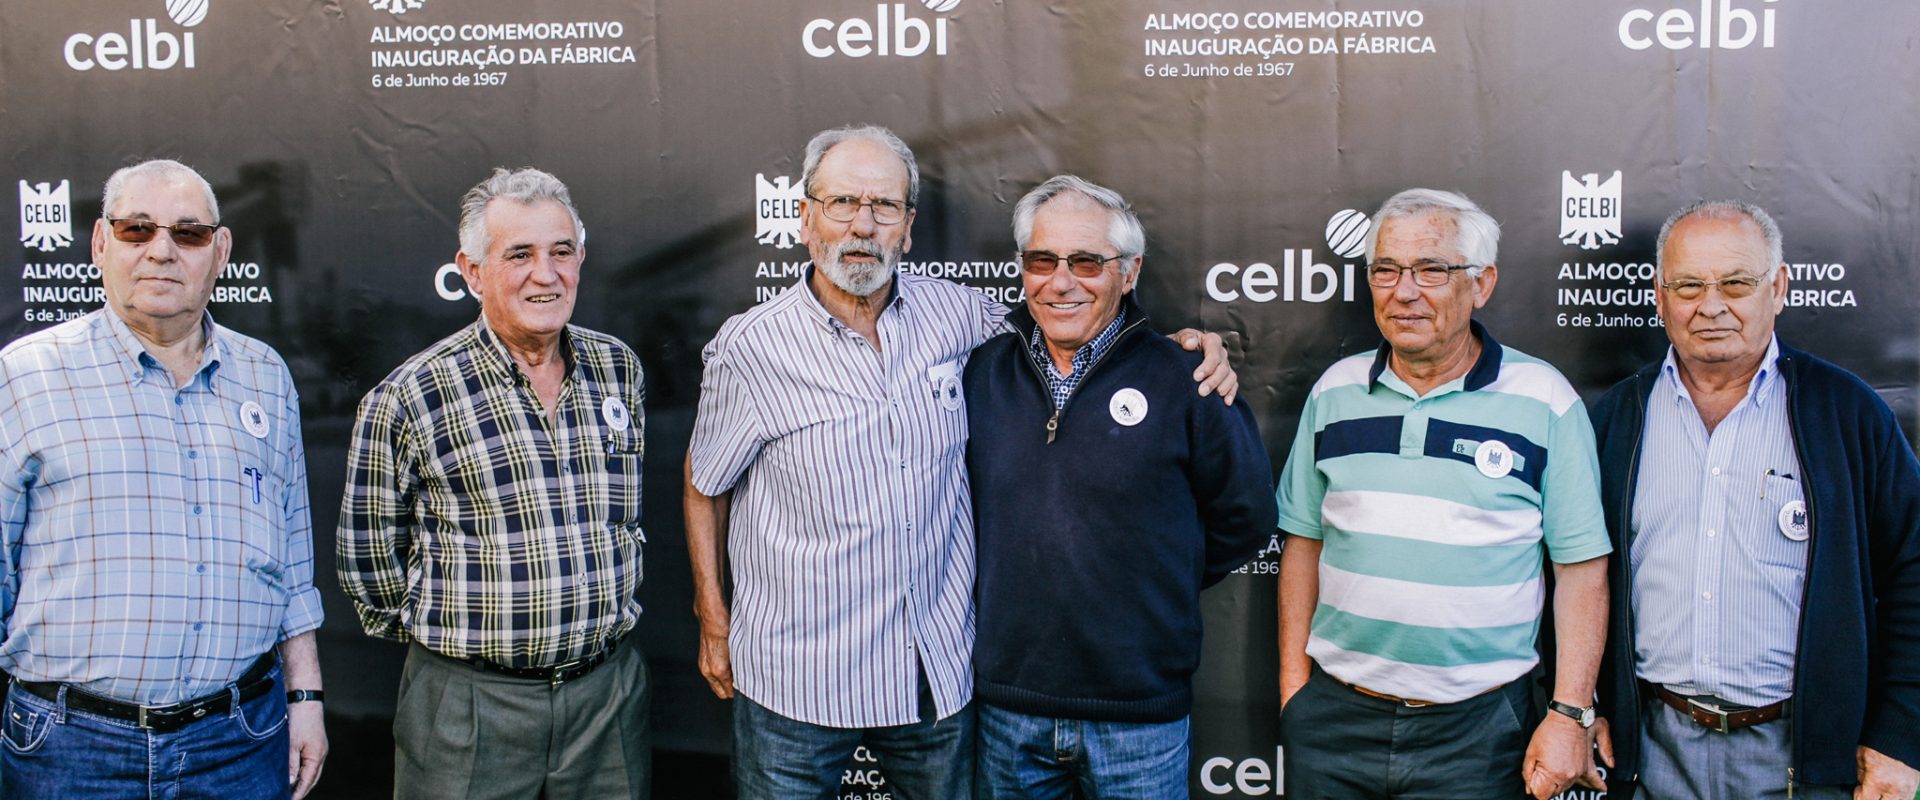 “Honouring Celbi’s history makes us bigger and better”